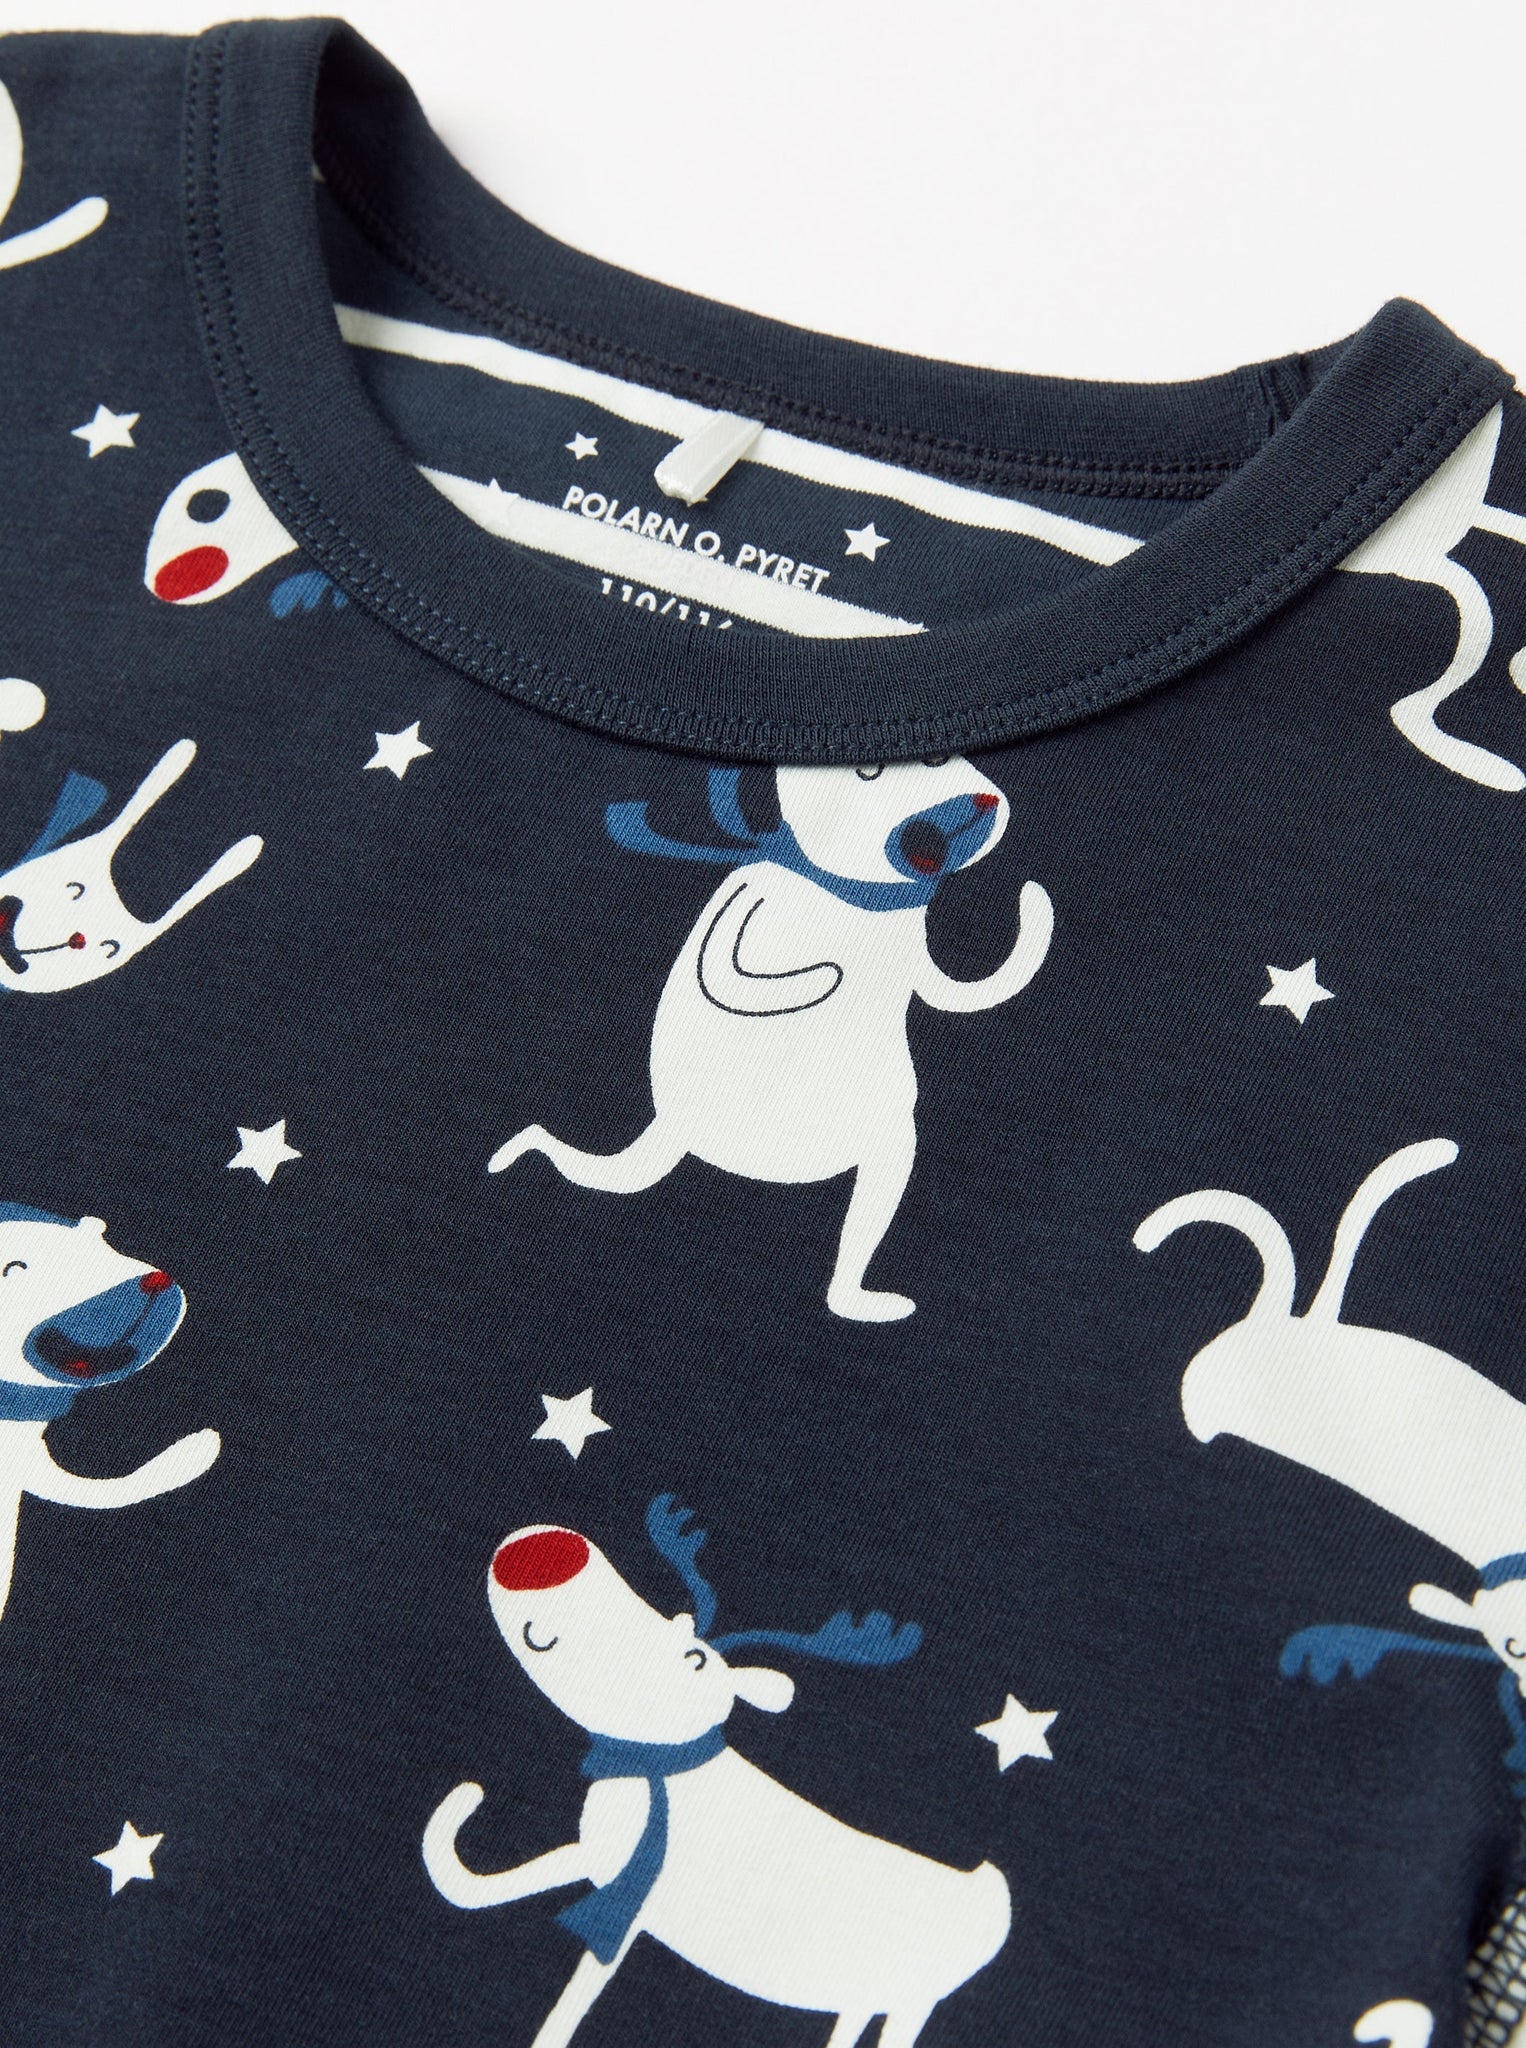 Organic Cotton Kids Christmas Pyjamas from the Polarn O. Pyret kidswear collection. Clothes made using sustainably sourced materials.